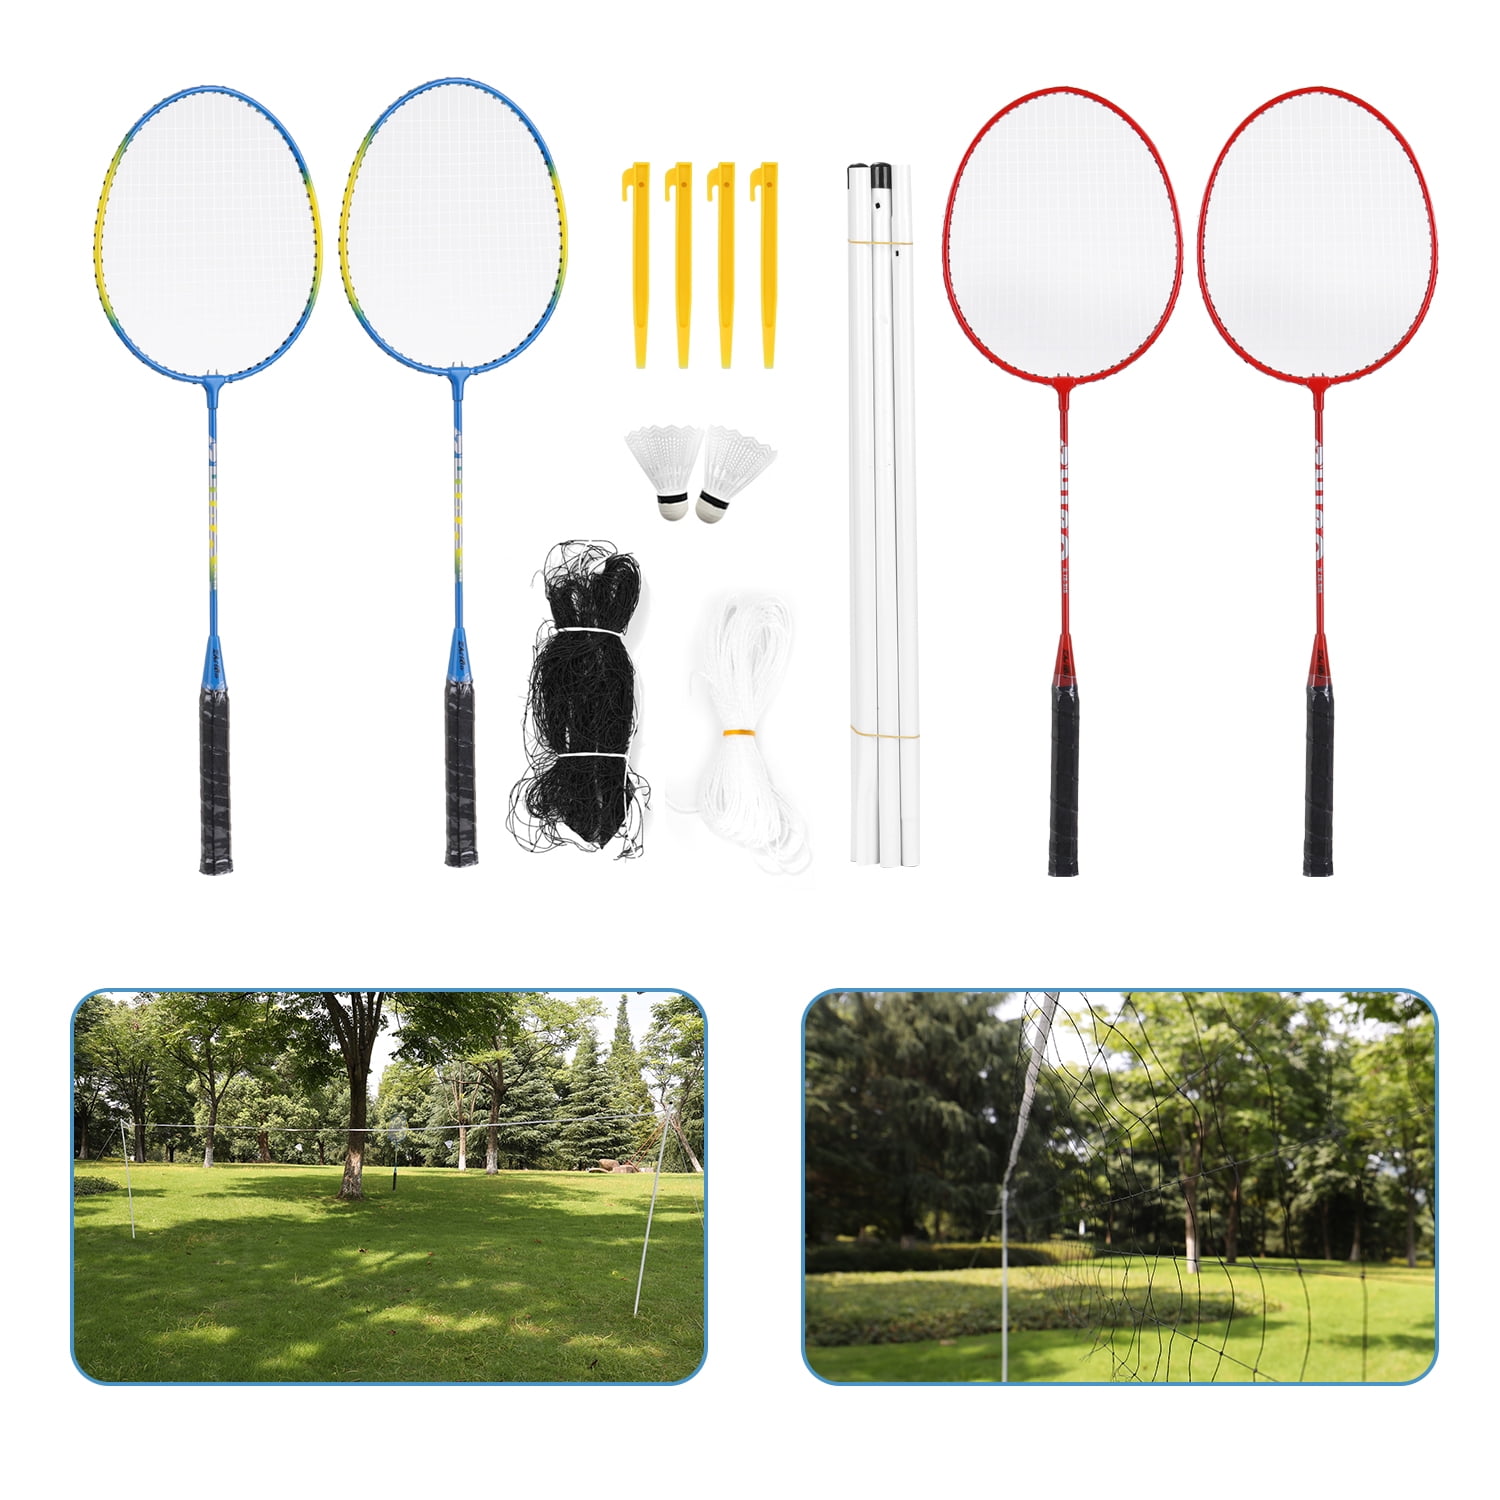 3 Shut Badminton Set Complete Outdoor Yard Game with 4 Racquets Net with Poles 